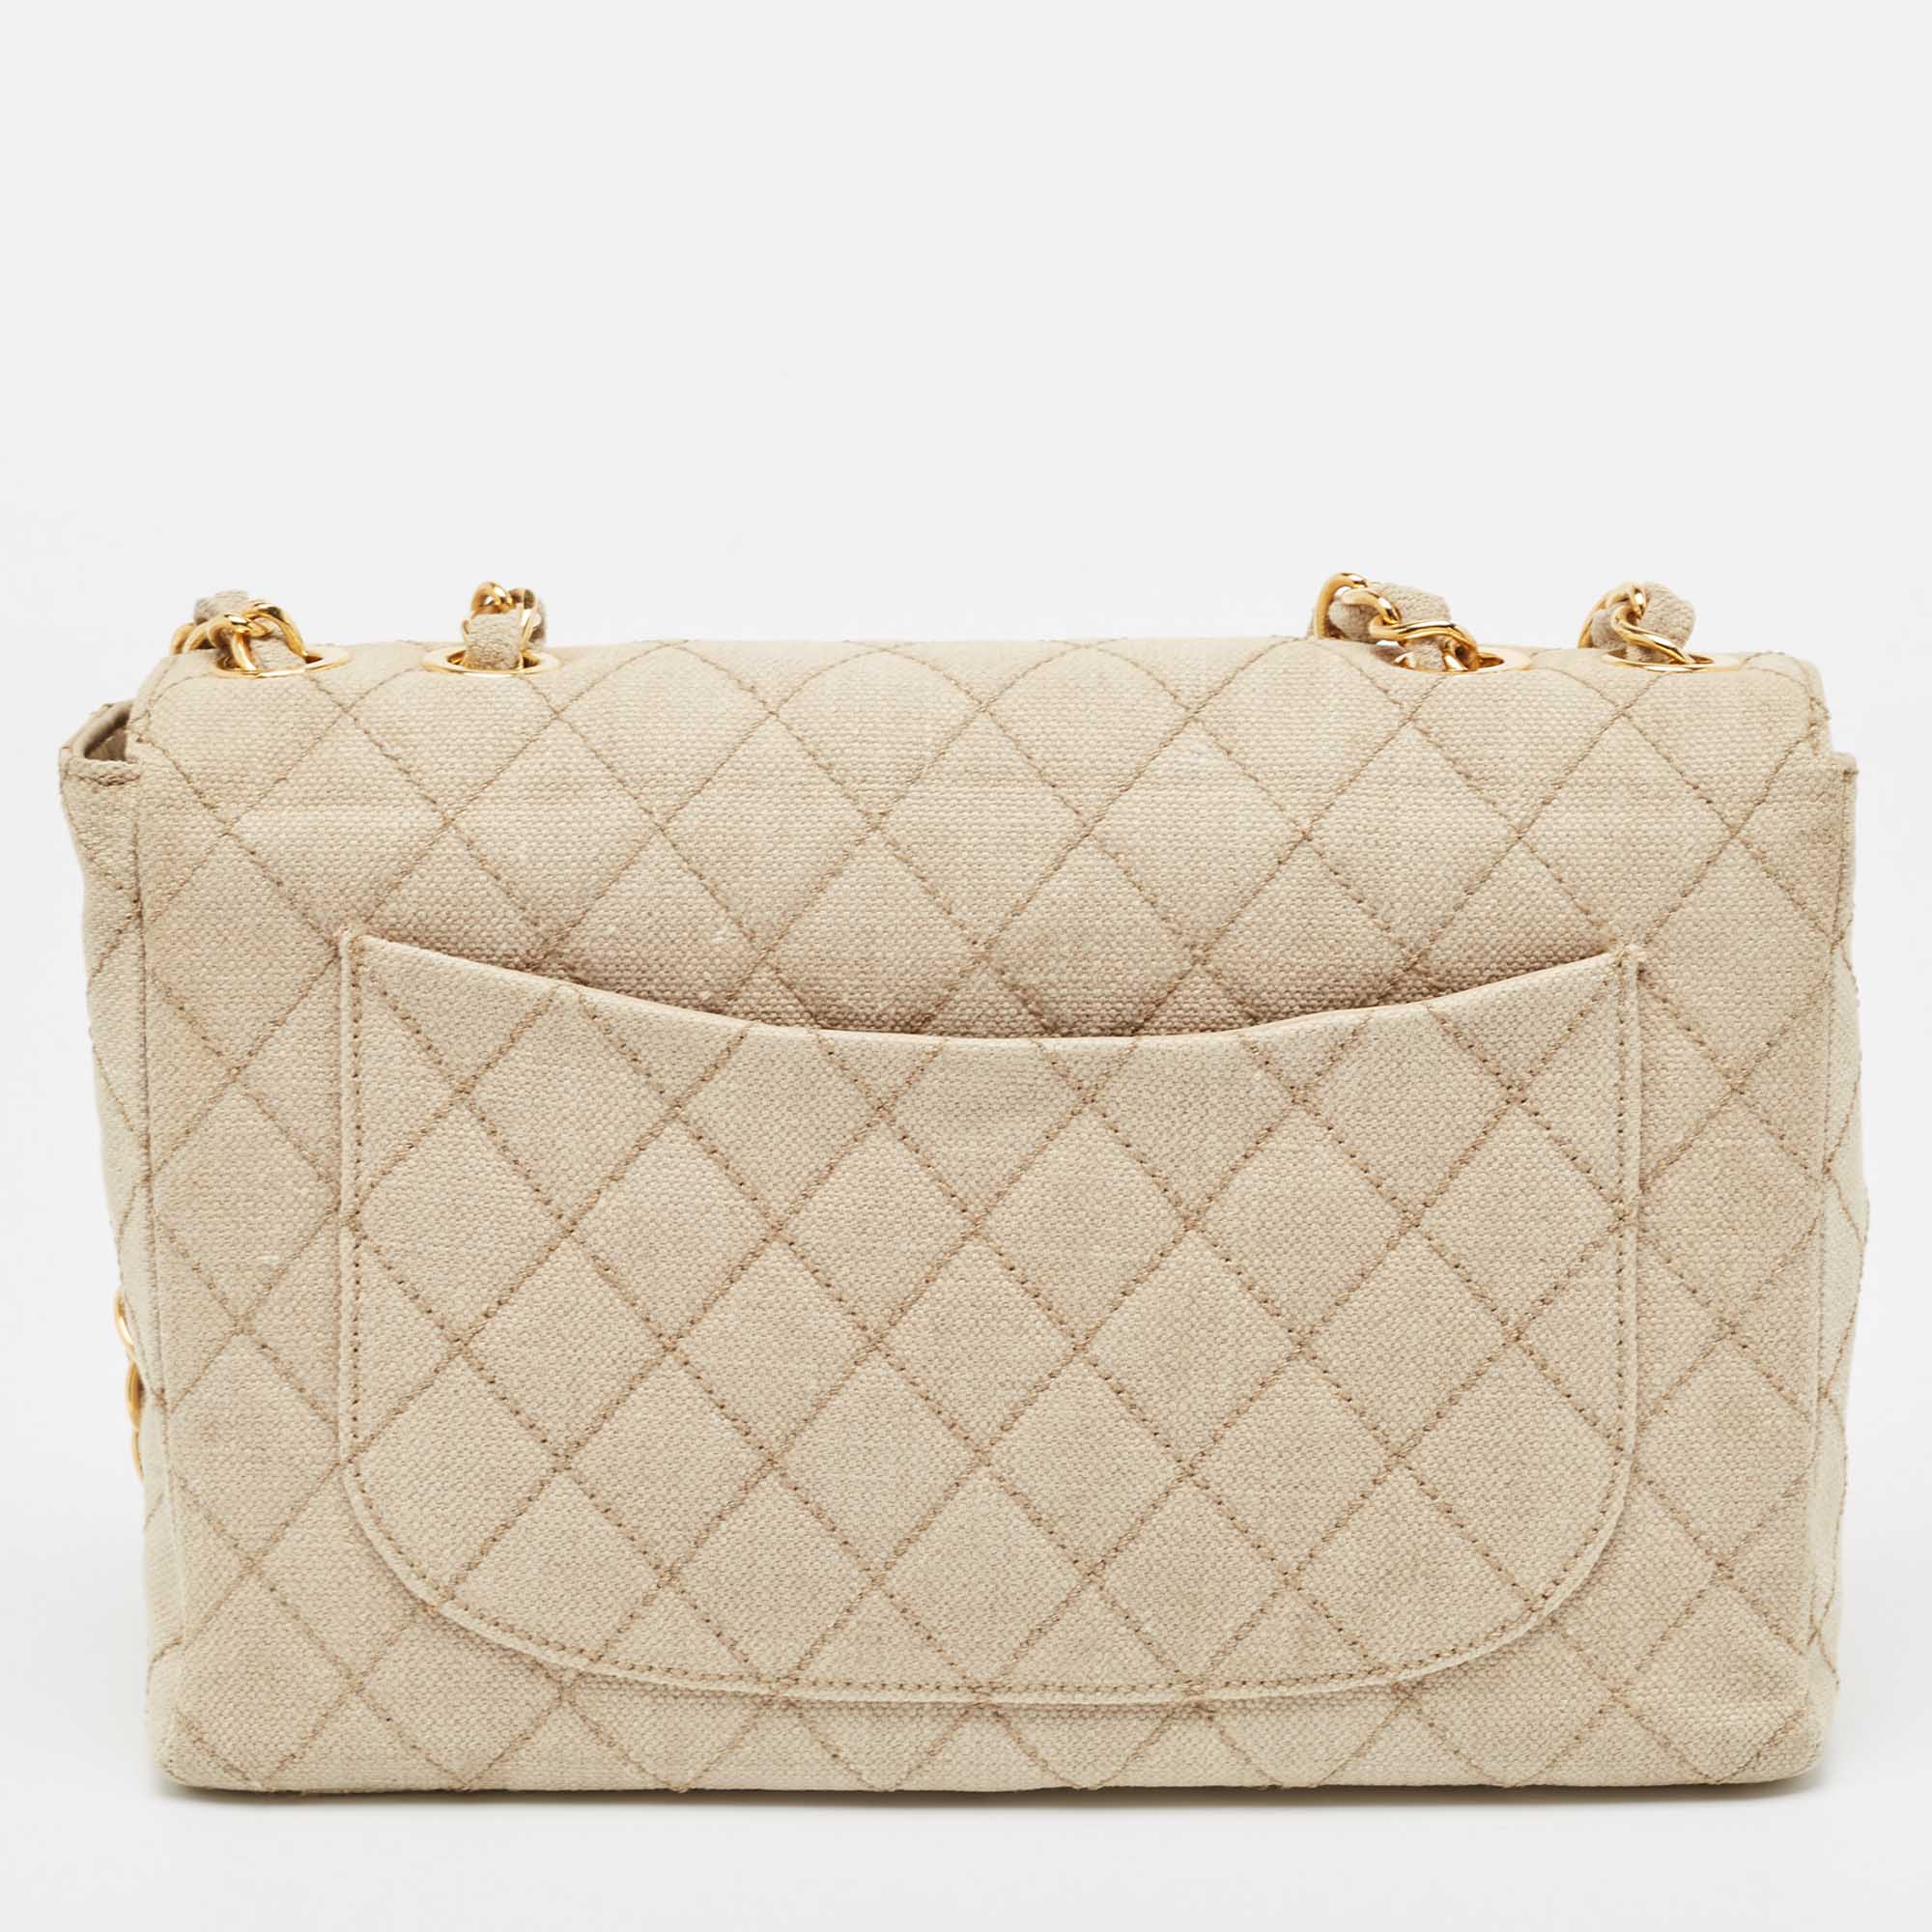 Chanel Light Beige Quilted Canvas Jumbo Classic Single Flap Bag